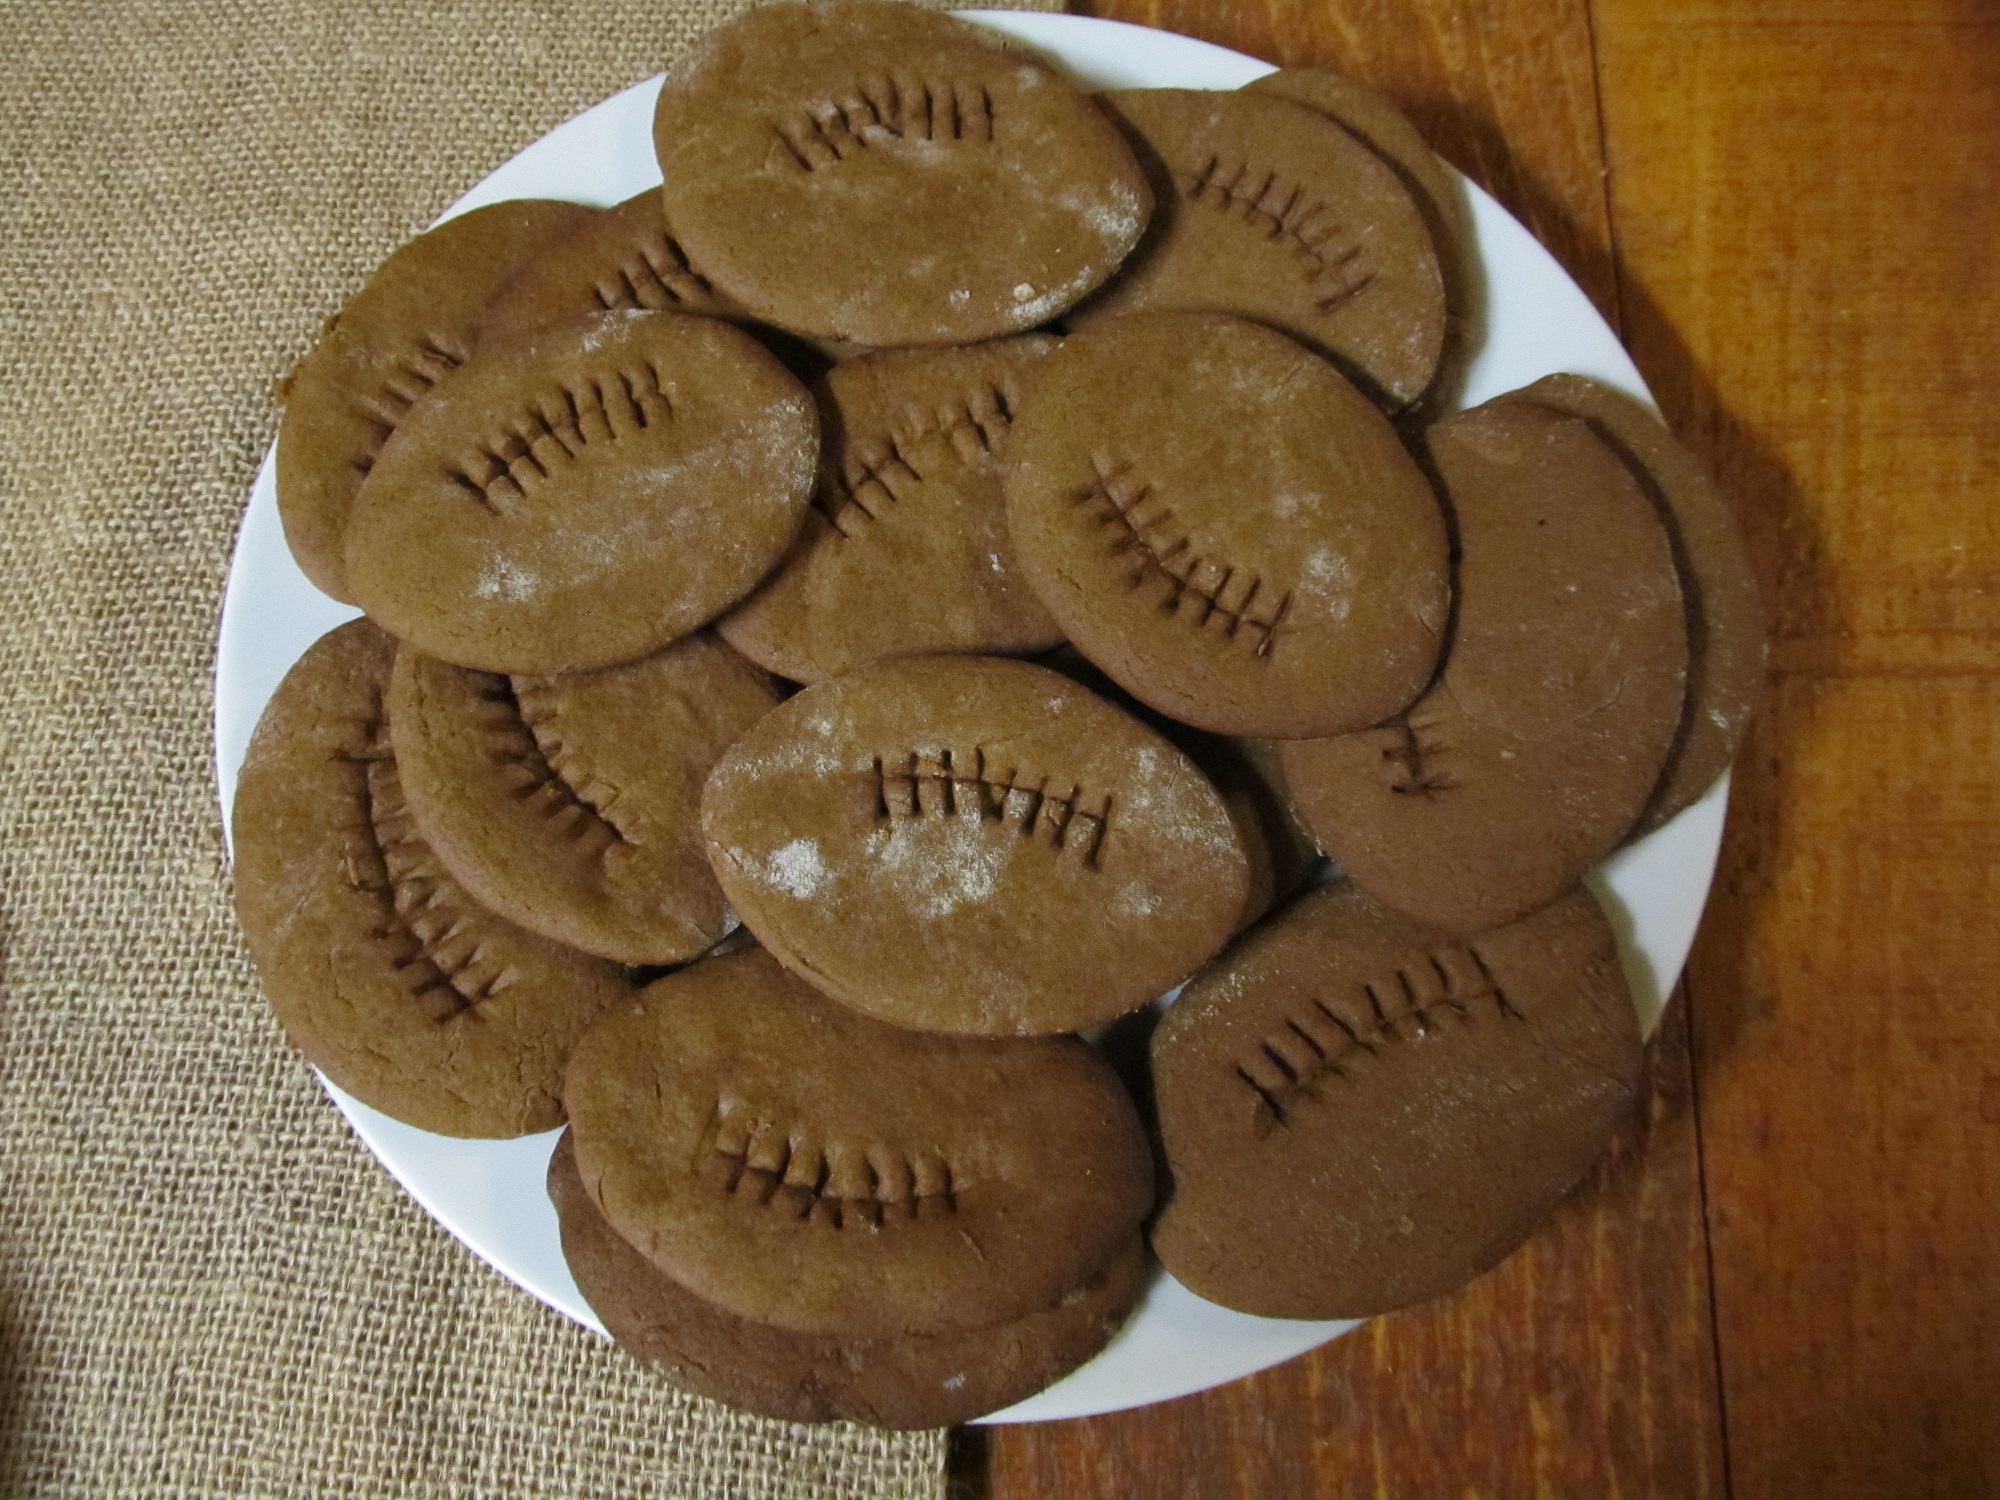 <!-- AddThis Share Buttons above via filter on get_the_excerpt -->
<div class="at-above-post-arch-page" data-url="http://www.not2crafty.com/2014/01/football-cookies-super-bowl-party/" data-title="Football cookies for Super Bowl party"></div>

These football shaped ginger cookies are so good and spicy. I found the recipe years ago in an old cookbook but have changed it over the years until the final [...]<!-- AddThis Share Buttons below via filter on get_the_excerpt -->
<div class="at-below-post-arch-page" data-url="http://www.not2crafty.com/2014/01/football-cookies-super-bowl-party/" data-title="Football cookies for Super Bowl party"></div><!-- AddThis Share Buttons generic via filter on get_the_excerpt -->
<!-- AddThis Related Posts generic via filter on get_the_excerpt -->
